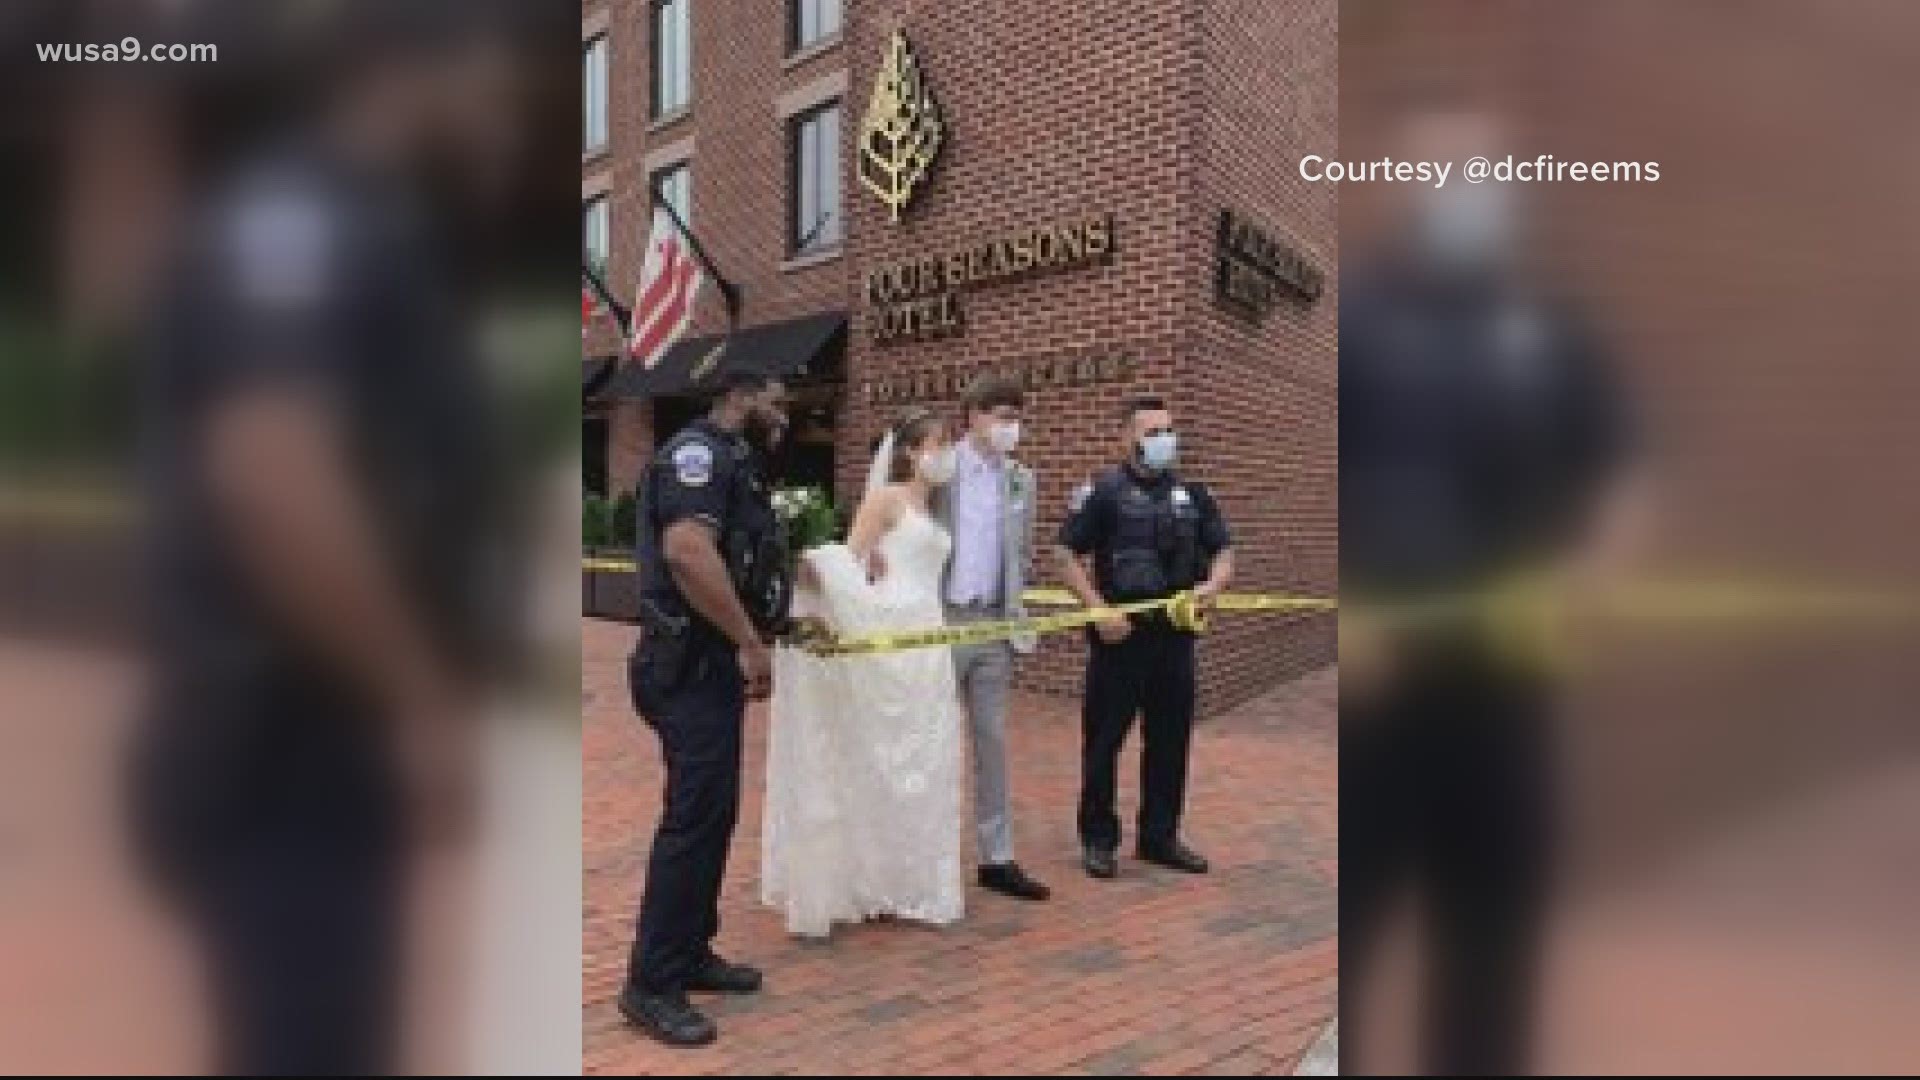 DC Fire and EMS confirmed that they were in contact with the wedding parties, who seemed to be mostly taking the news in stride.